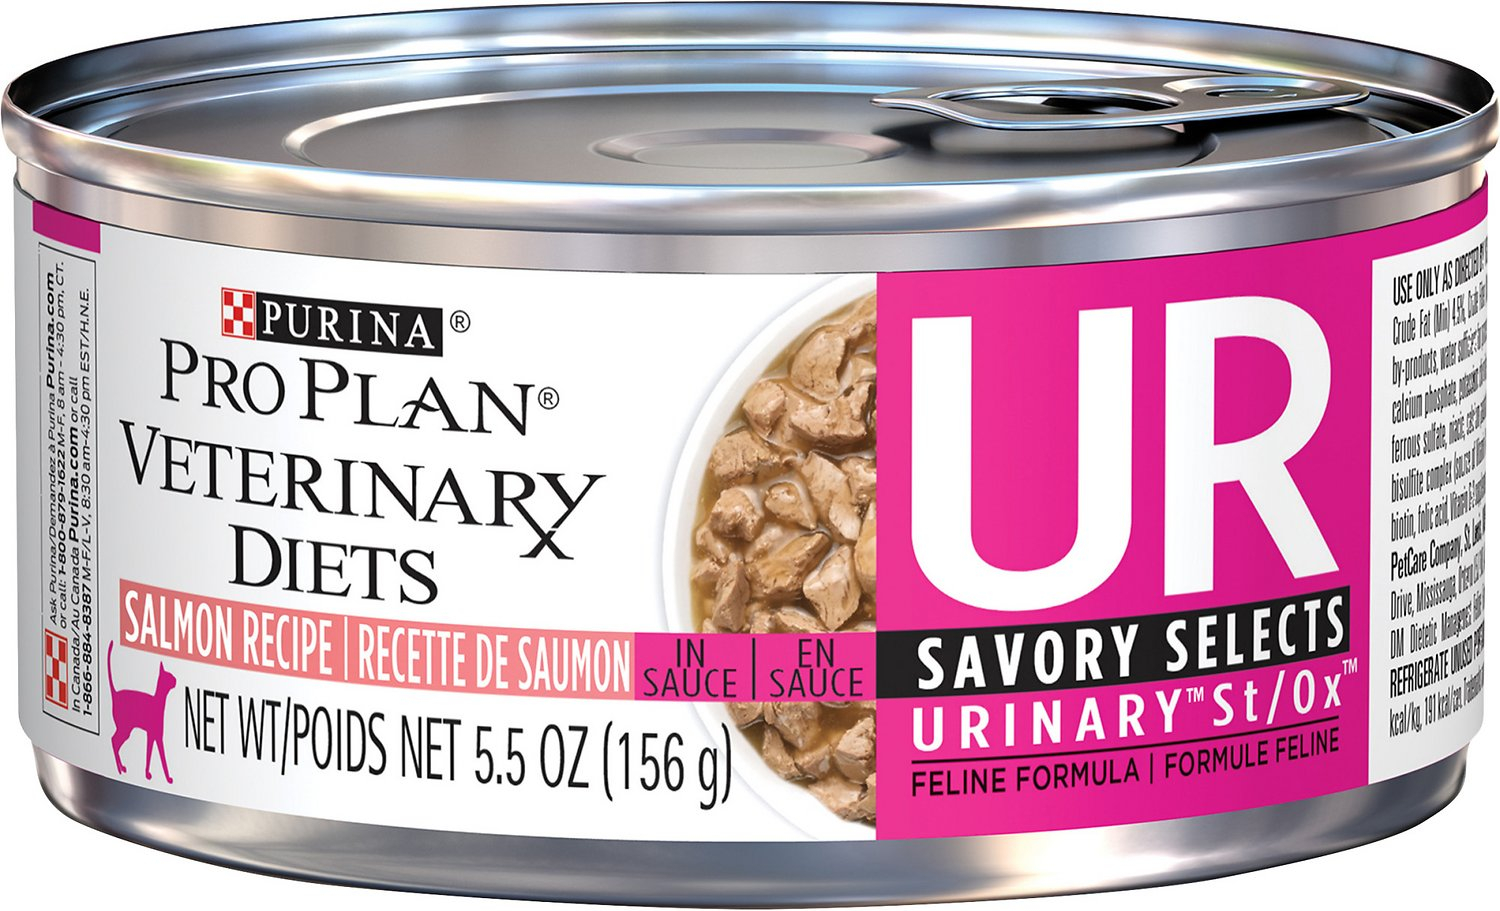 Purina Pro Plan Veterinary Diets UR Savory Selects Urinary 